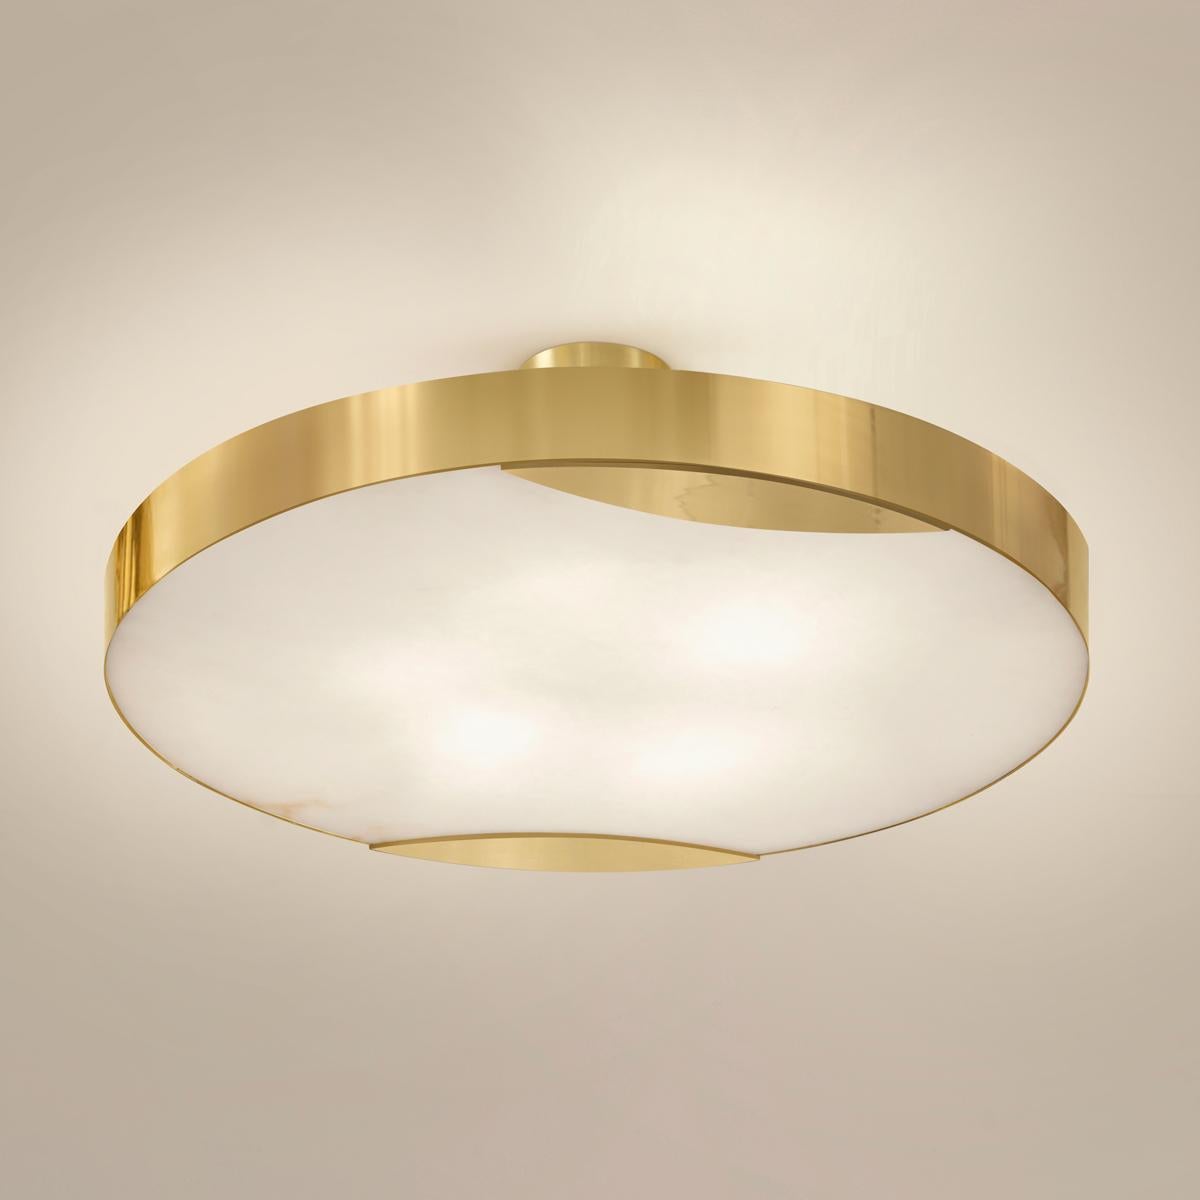 Cloud N.1 Ceiling Light by Gaspare Asaro-Satin Brass Finish For Sale 3